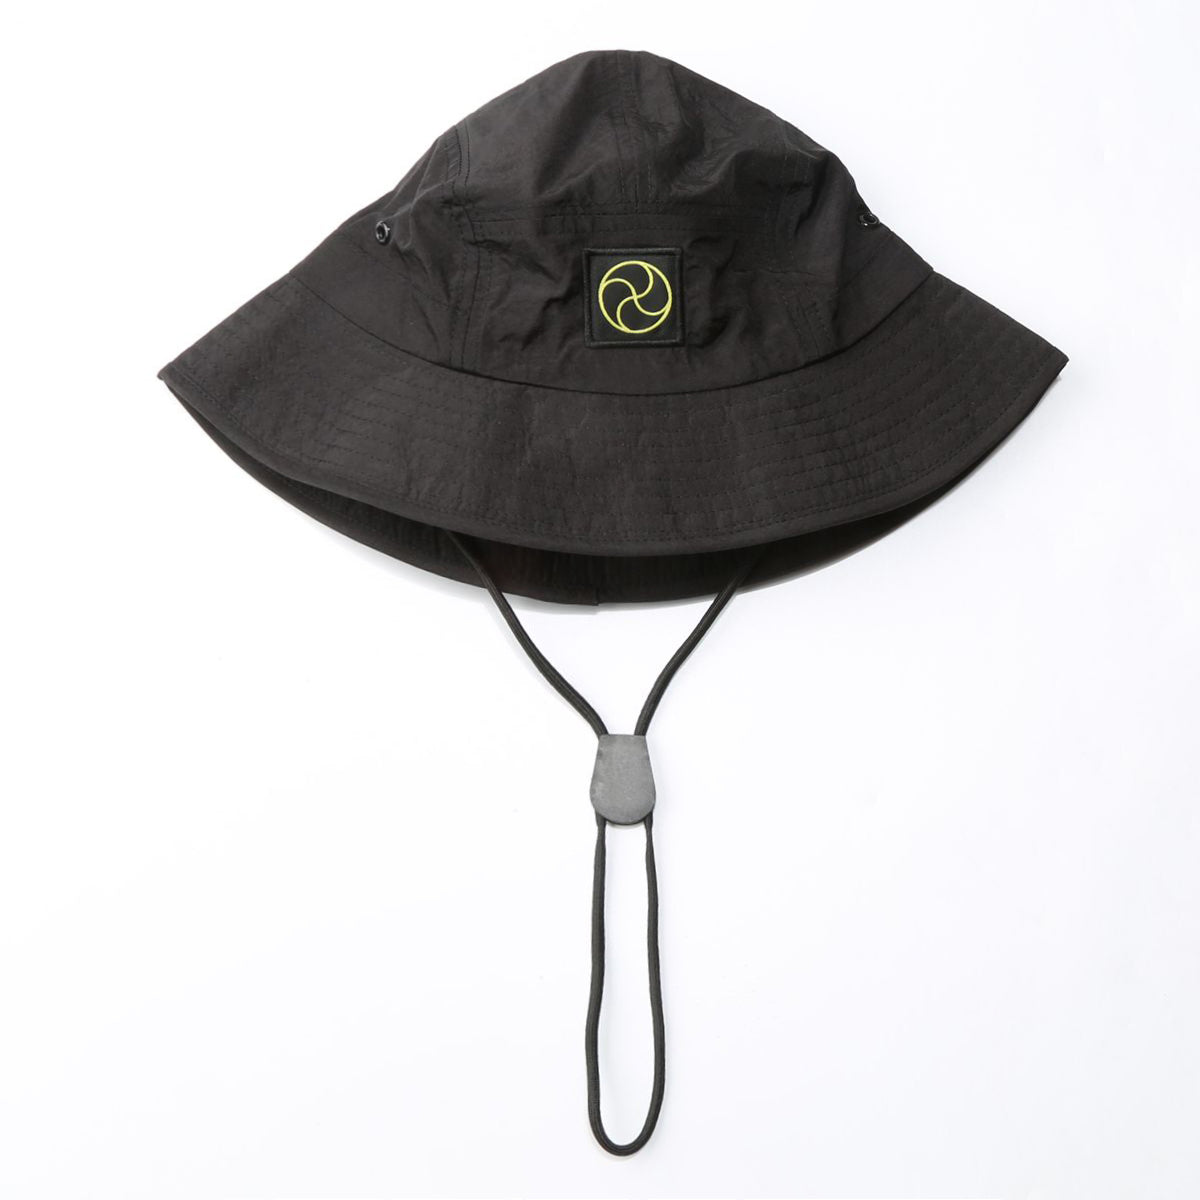 Casual Sunshade Hats - Trendy Tide Brand for Men and Women